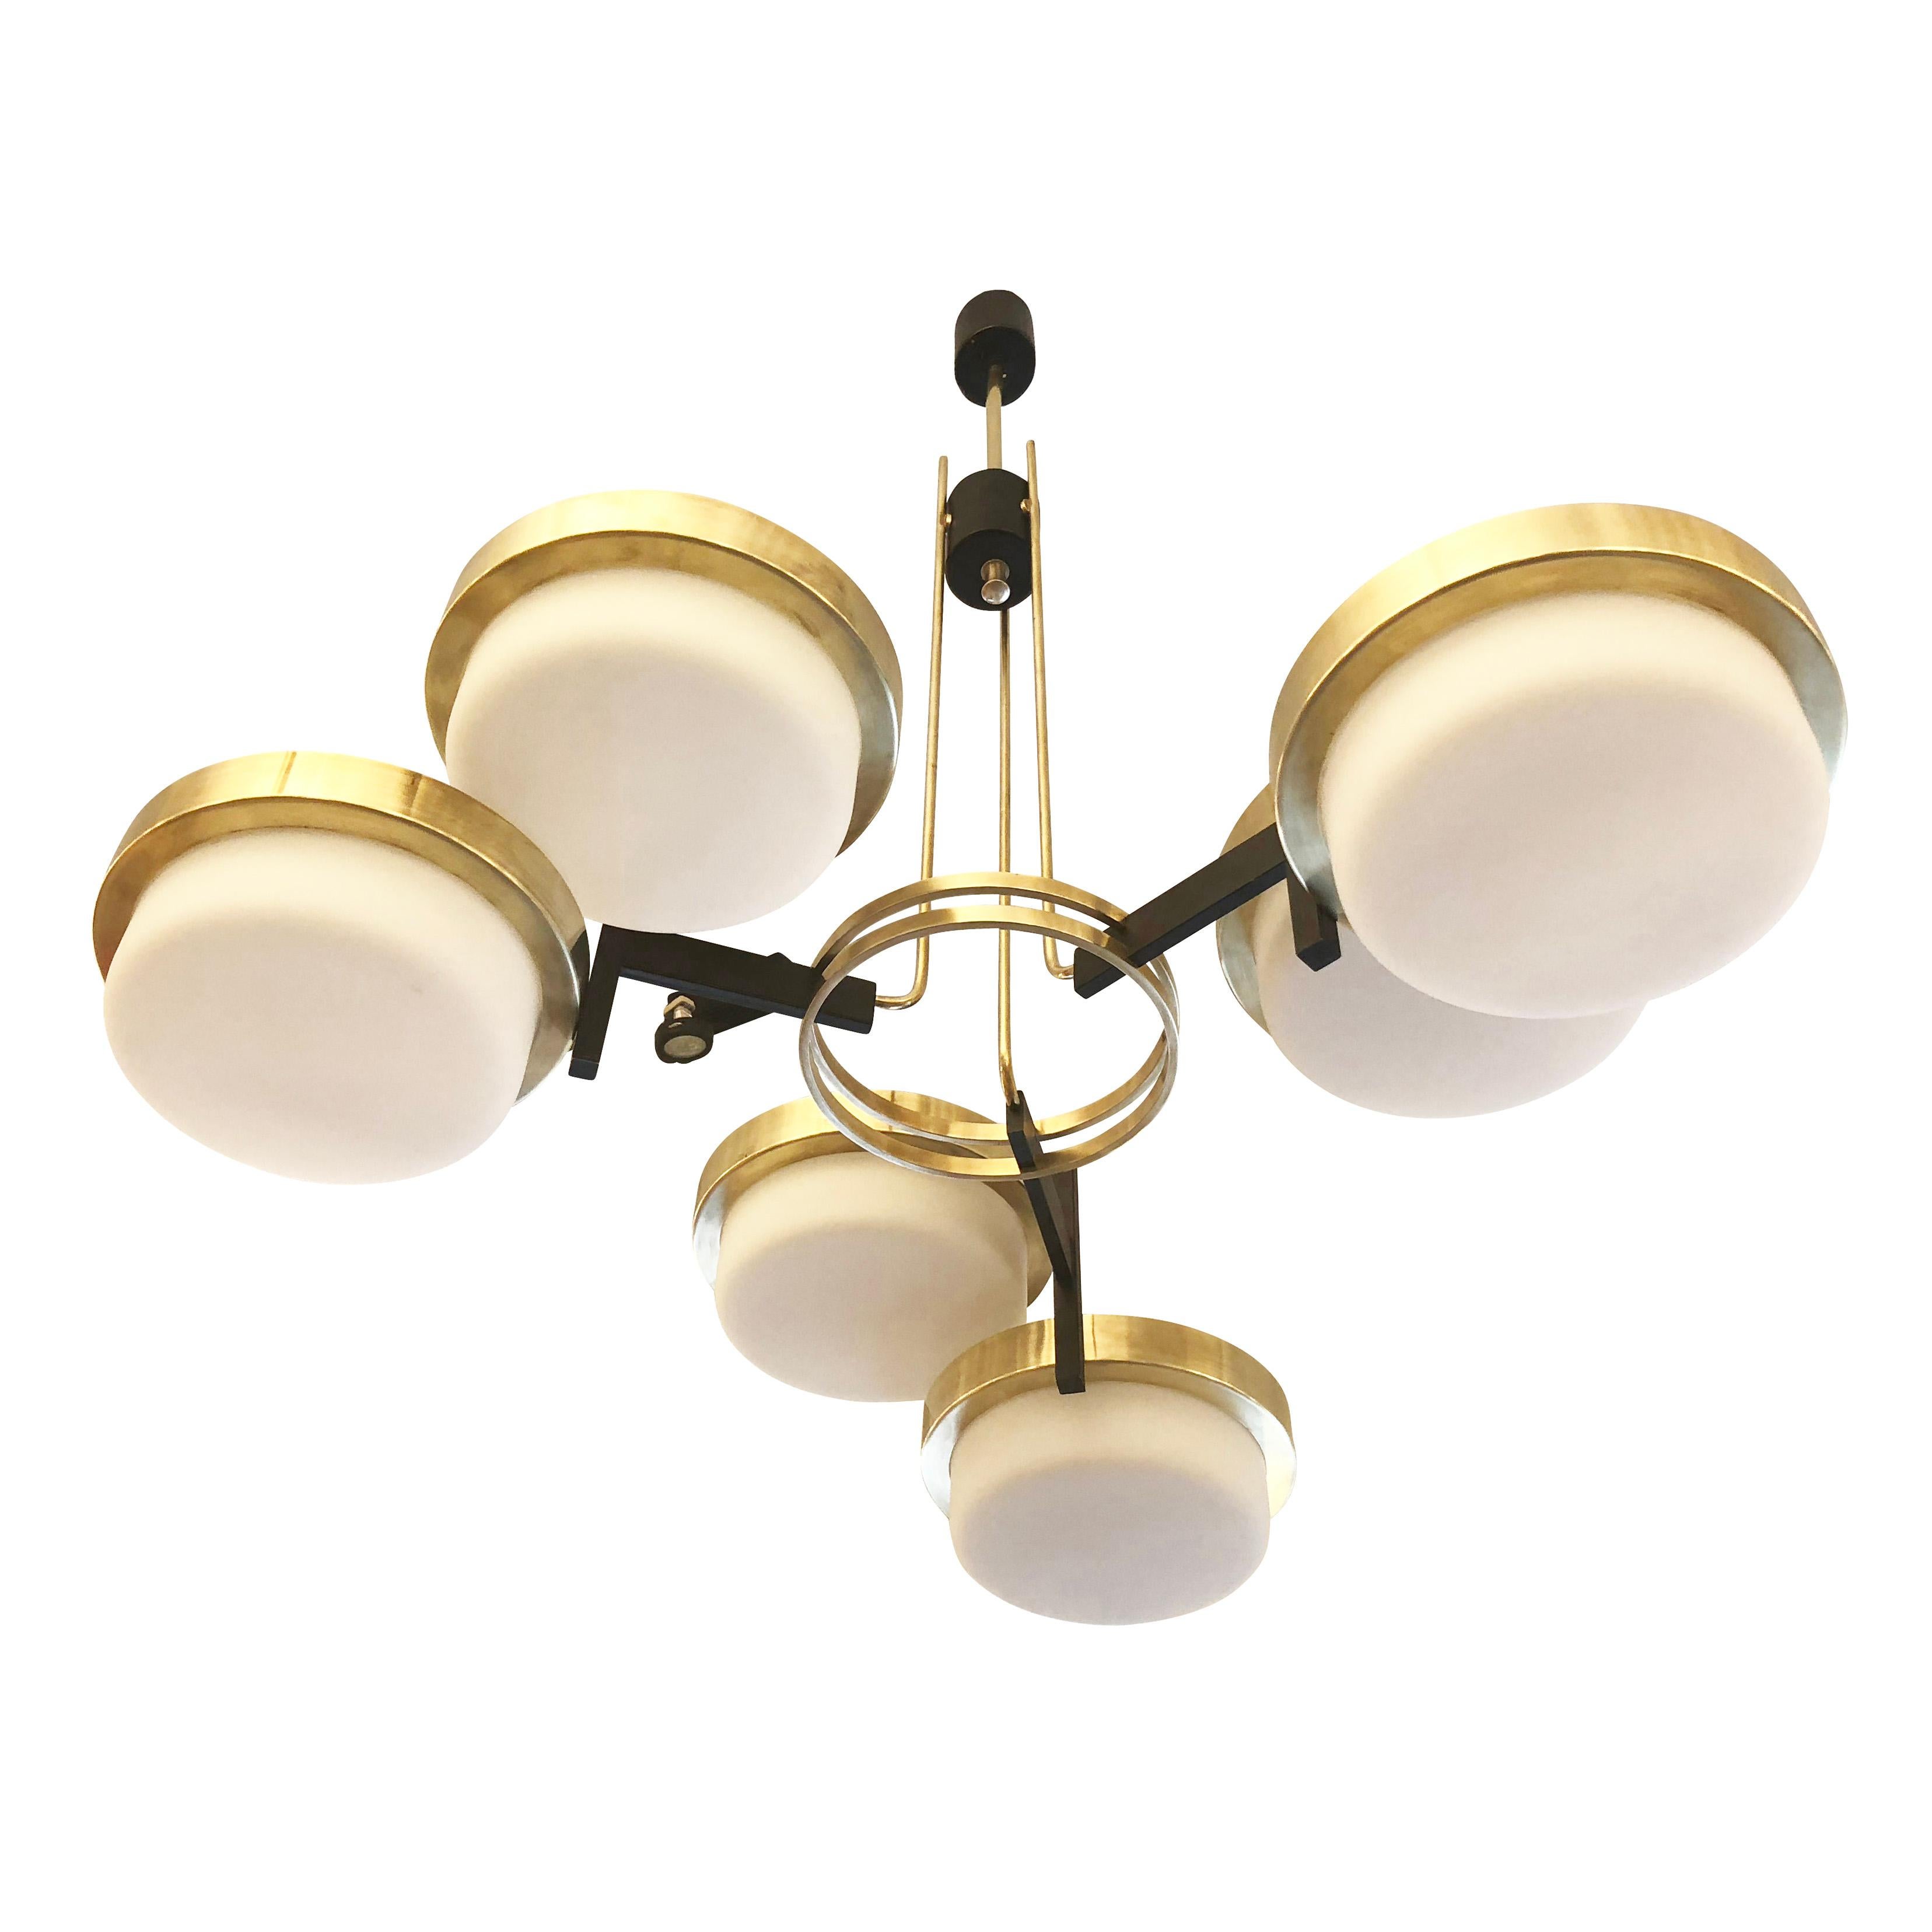 Stunning midcentury fixture attributed to Stilnovo, featuring six shades on a brass and black lacquered frame. Each shade has a brass rim and frosted glass diffuser. Holds one candelabra socket per shade. Drop can be adjusted as